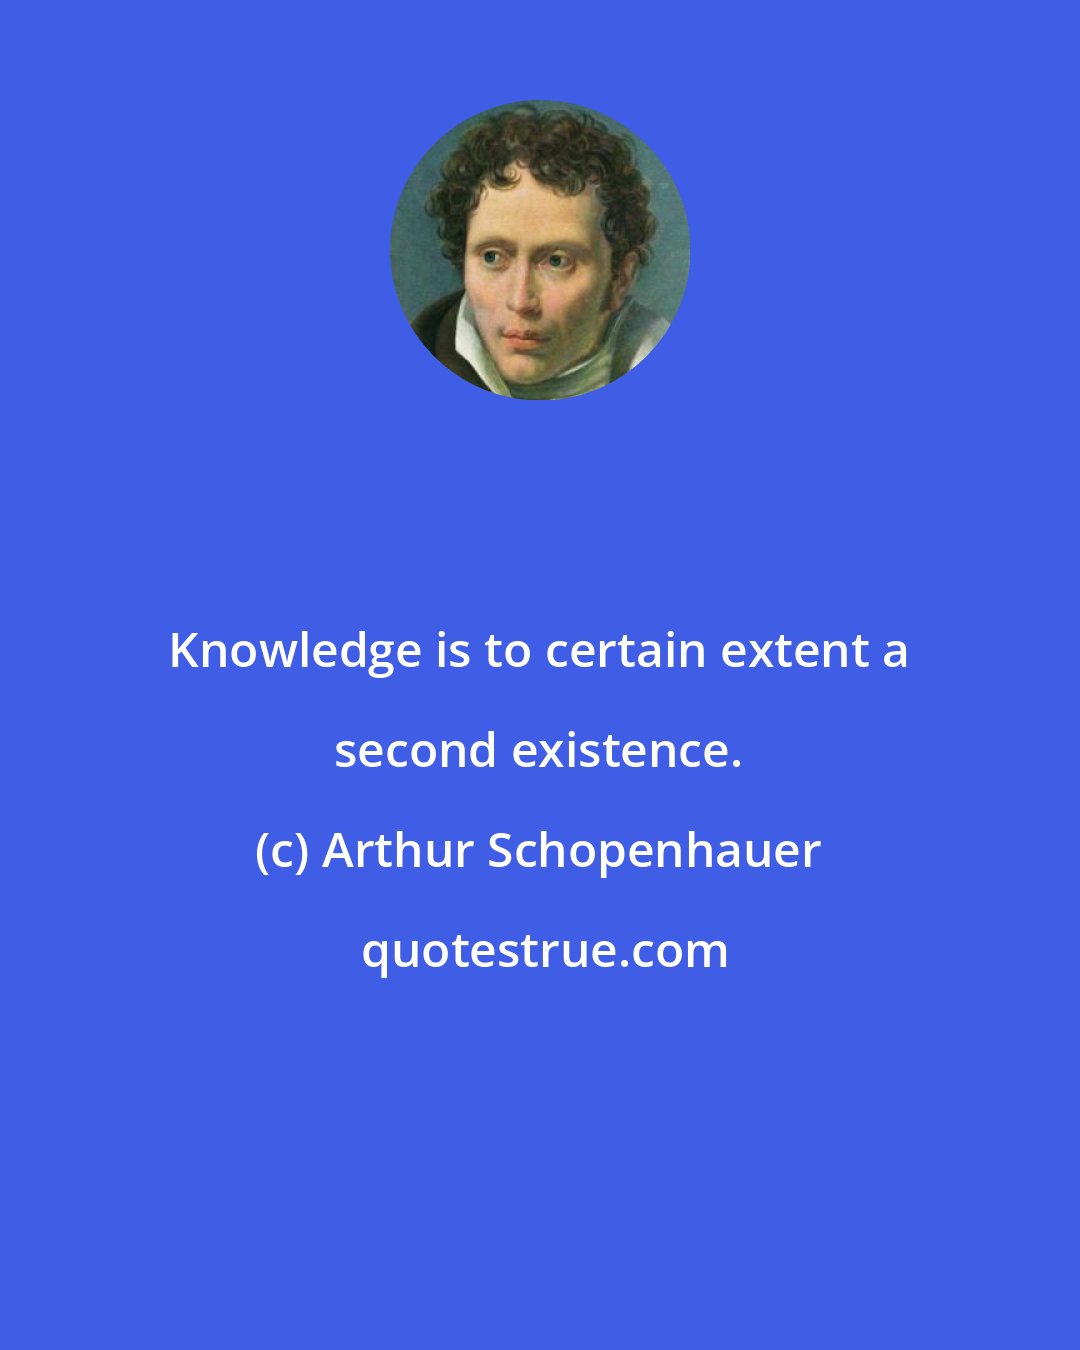 Arthur Schopenhauer: Knowledge is to certain extent a second existence.